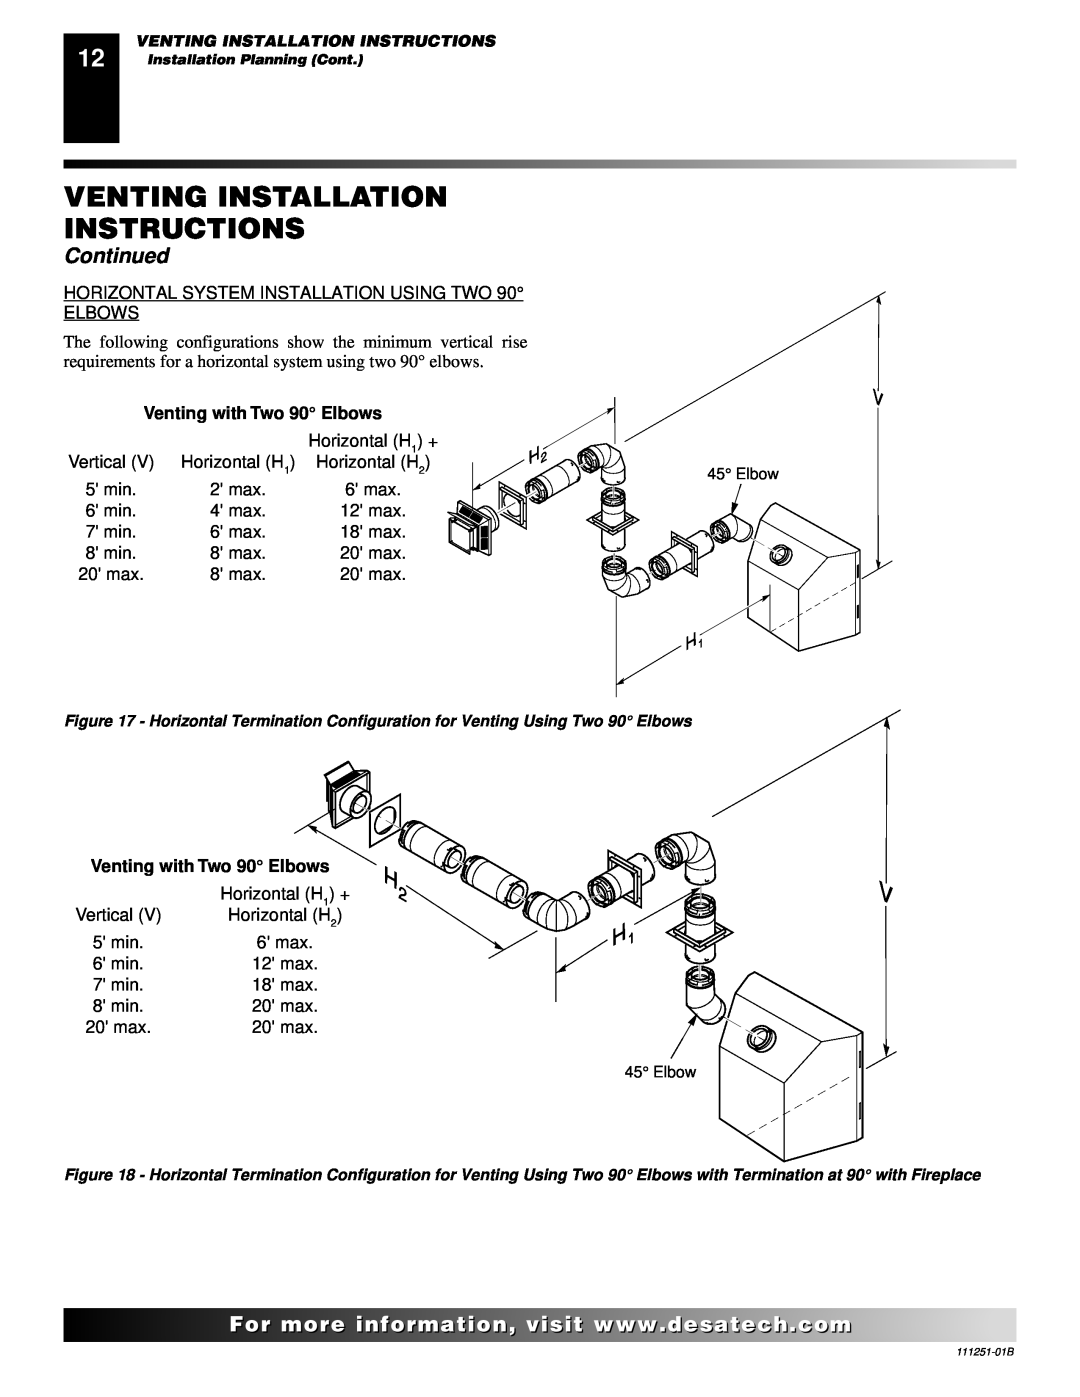 Desa (V)T36ENA installation manual Venting Installation Instructions, Continued, Venting with Two 90 Elbows 